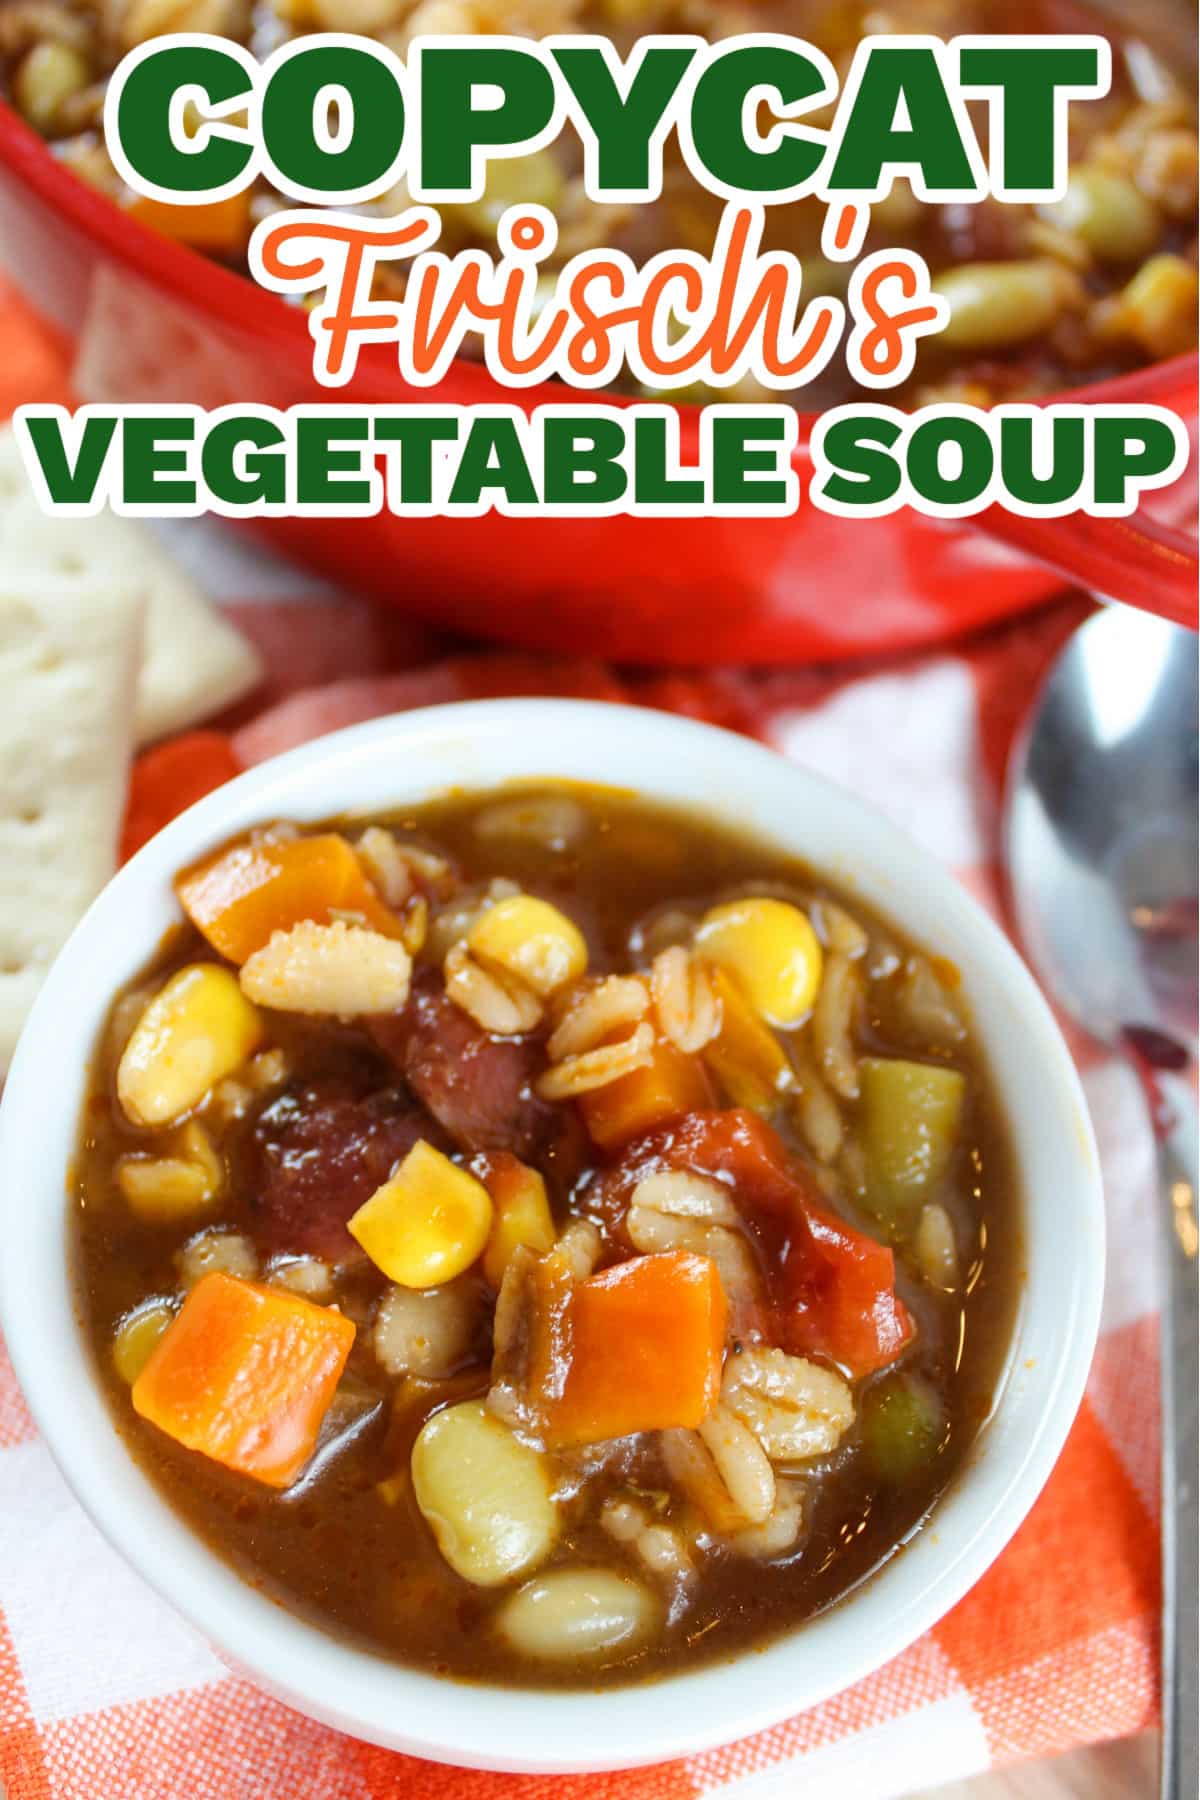 Frisch's Vegetable Soup is a delicious comforting soup that is super healthy and perfect year round! Loaded with vegetables - it's actually not vegetarian though...find out the secret ingredient below.  via @foodhussy